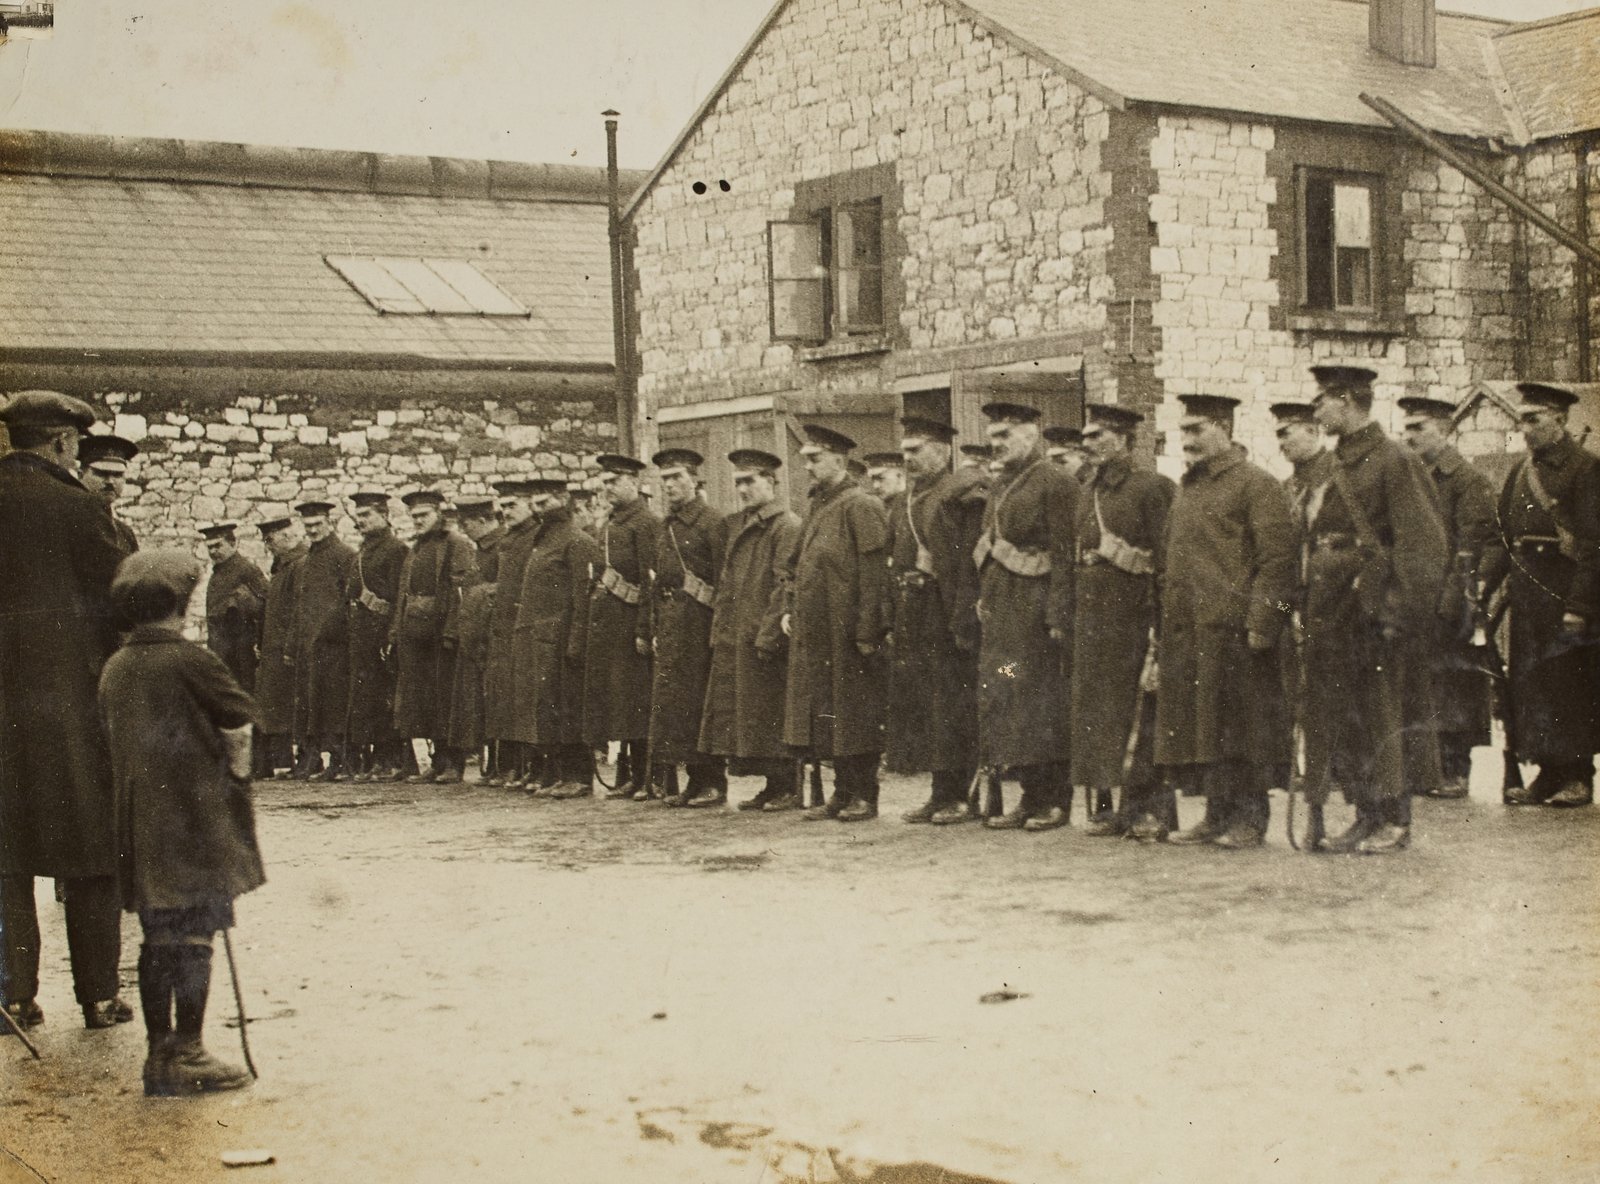 Image - The British withdrawal of troops and demobilising of police happened so fast, it created a vacuum of security and authority across the country. Getty Images: National Library of Ireland